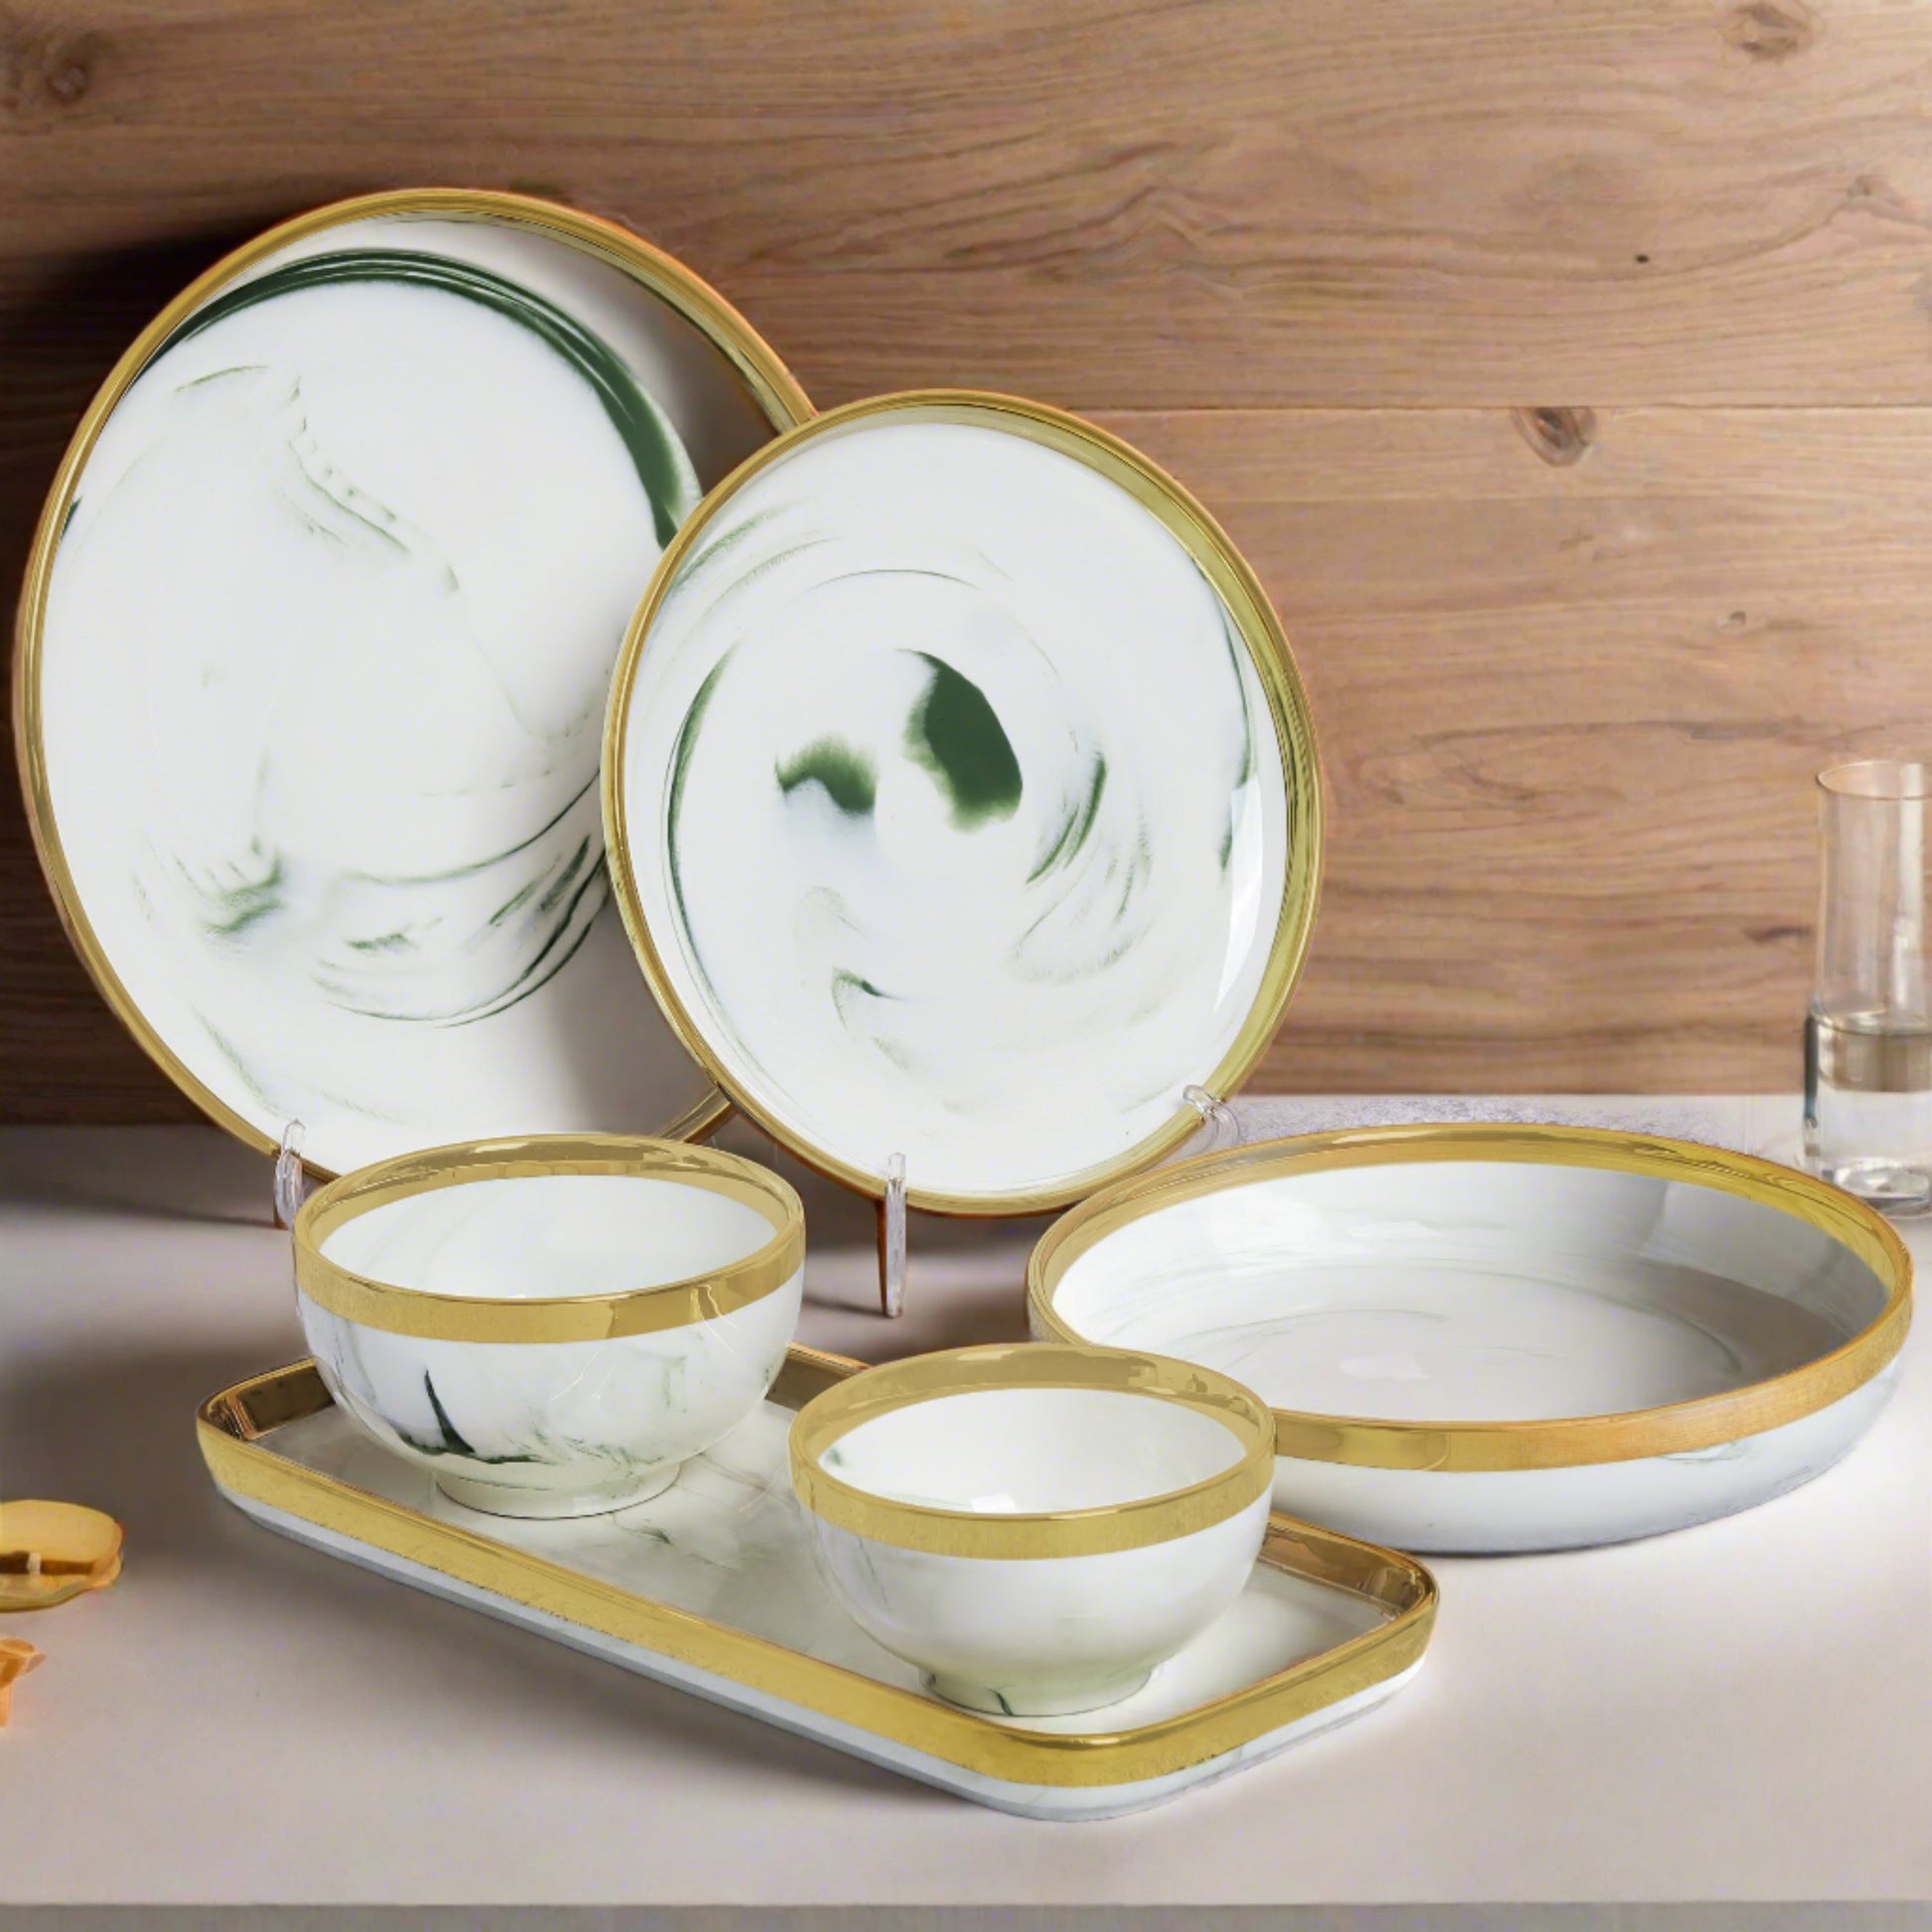 Complete 34-piece ceramic dinnerware set in elegant white finish - ideal for stylish dining occasions